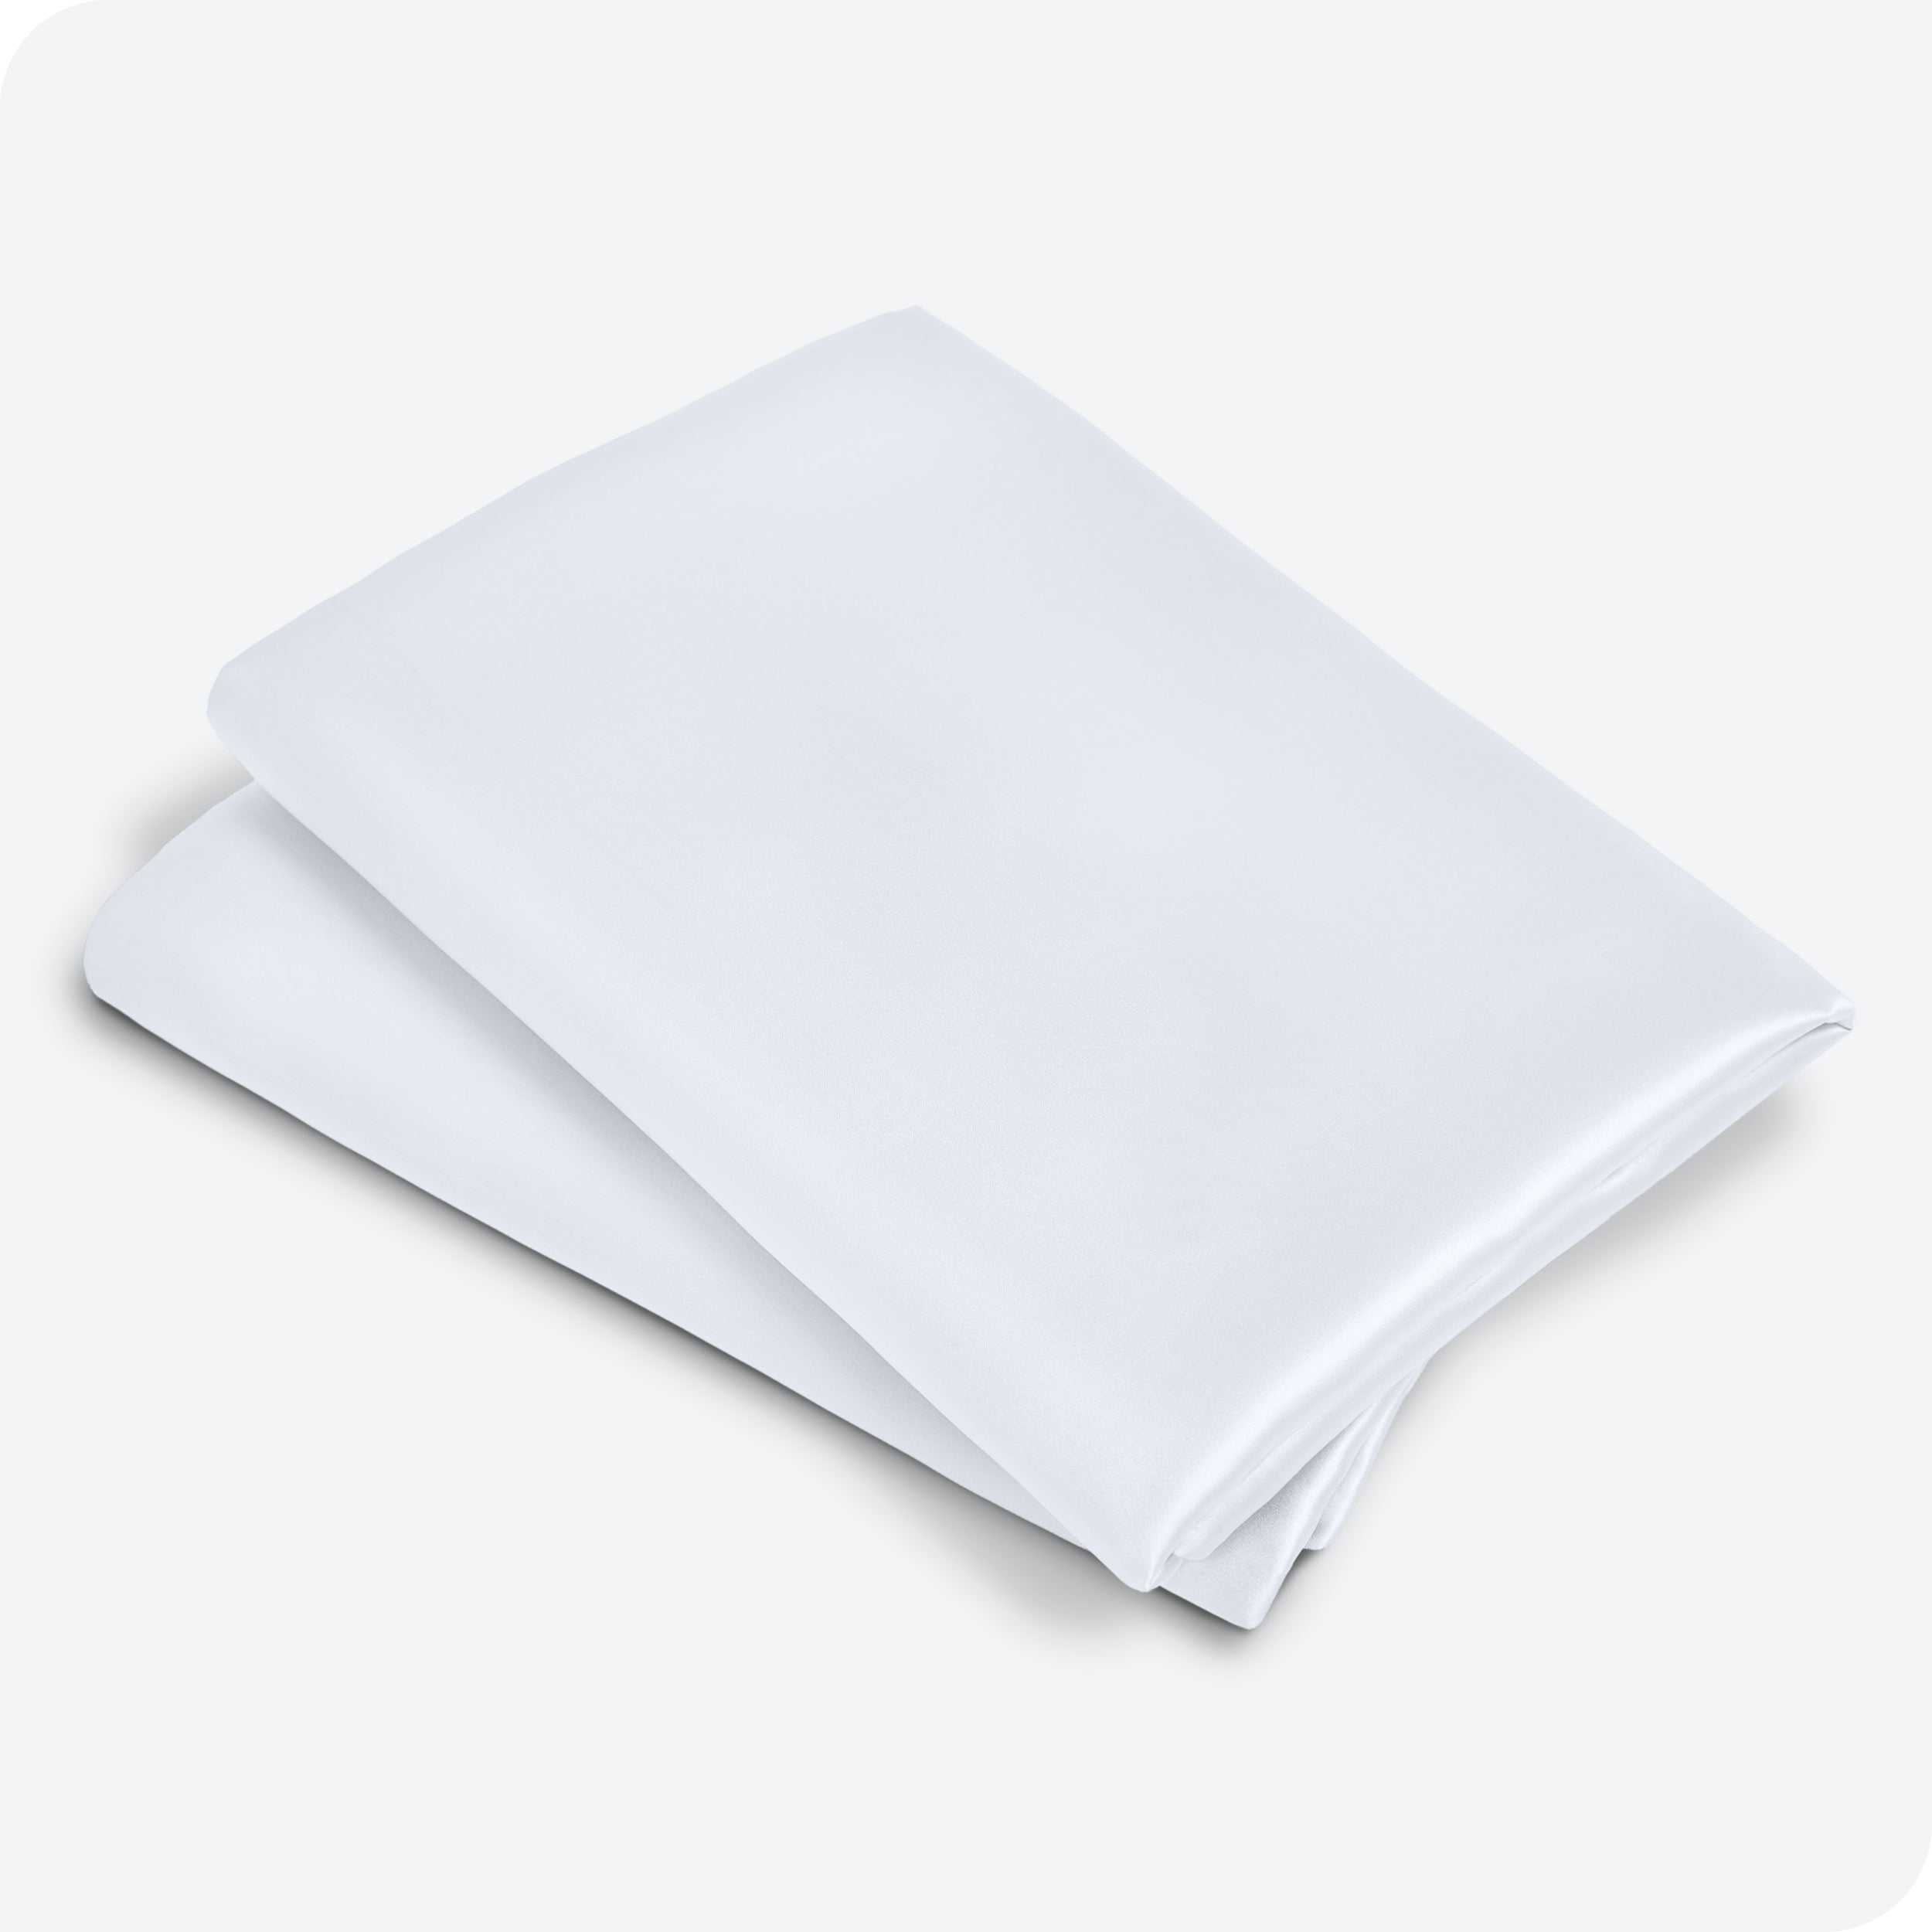 Two satin pillowcases folded and stacked